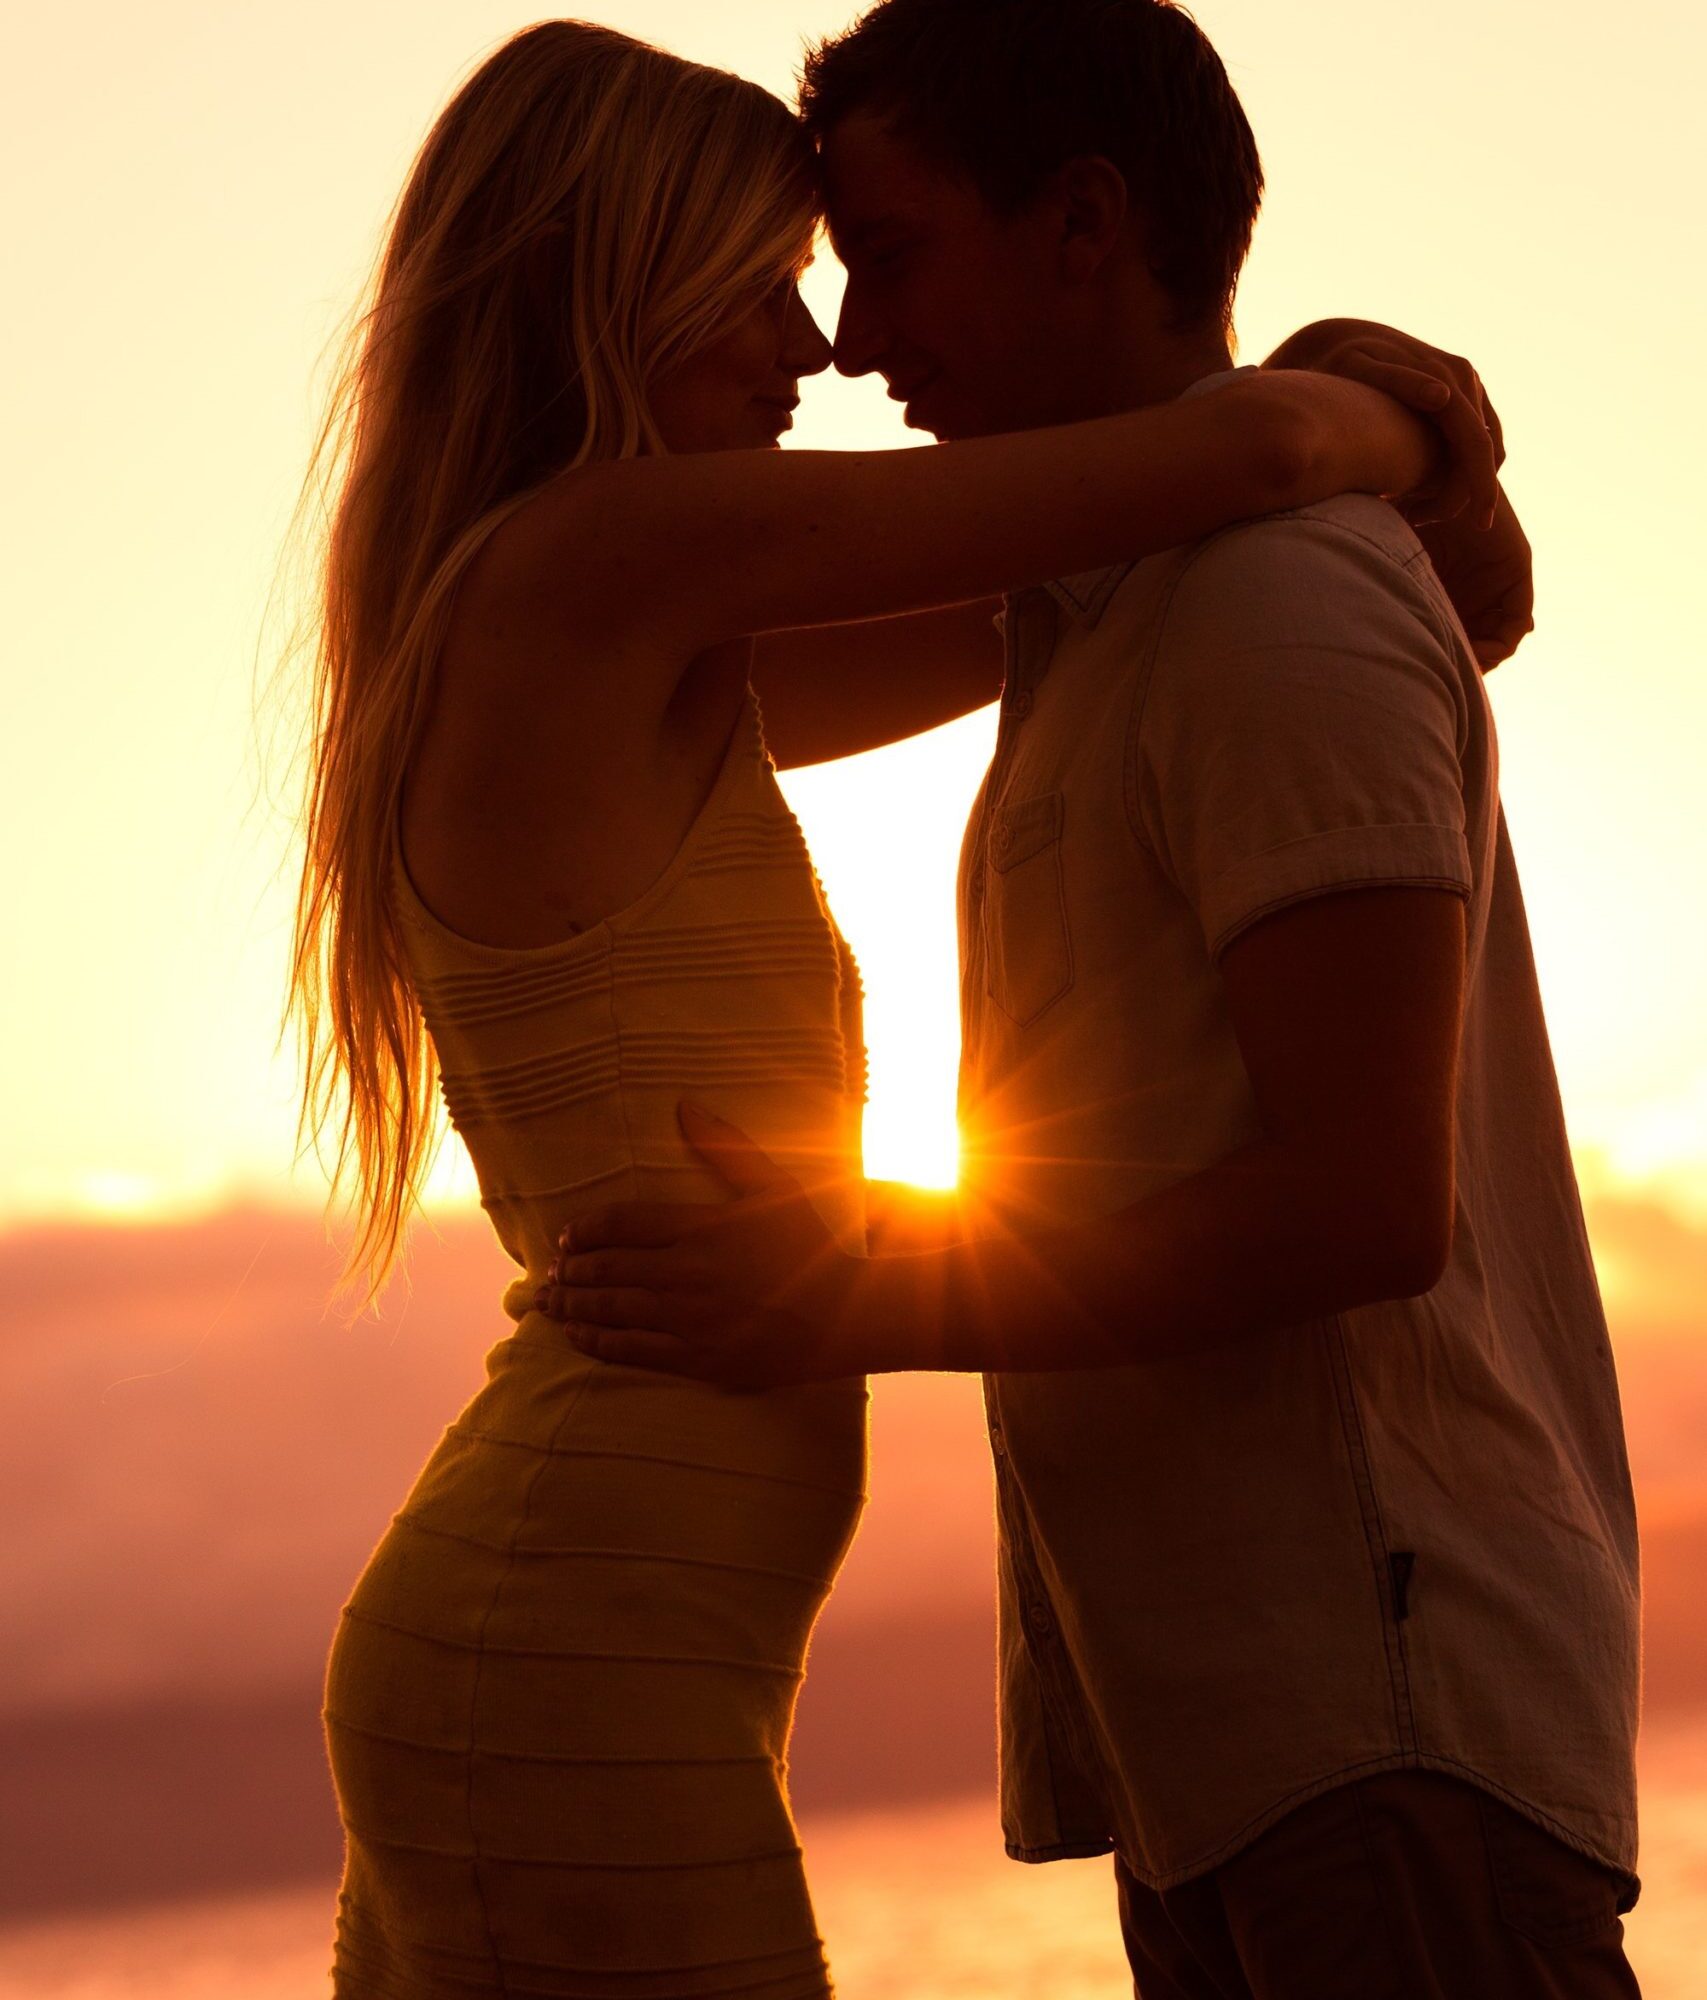 silhouette-of-romantic-couple-kissing-at-sunset-PCNULQ9